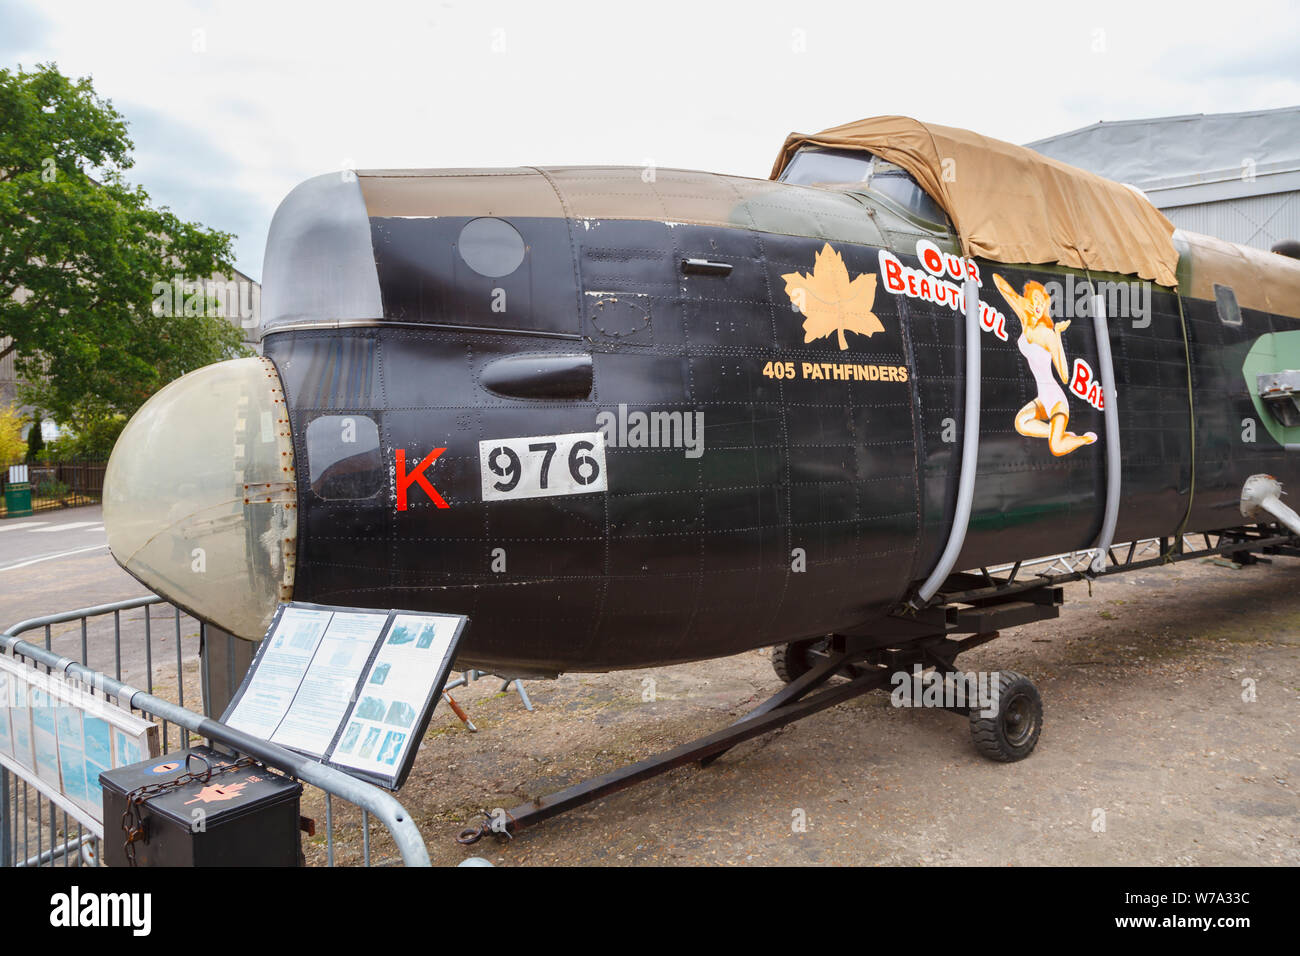 Second World War bomber, Lancaster KB976 Section 11 KB976 Nose and Fuselage Build, an exhibit in 2011 at the Brooklands Museum, Weybridge, Surrey, UK Stock Photo